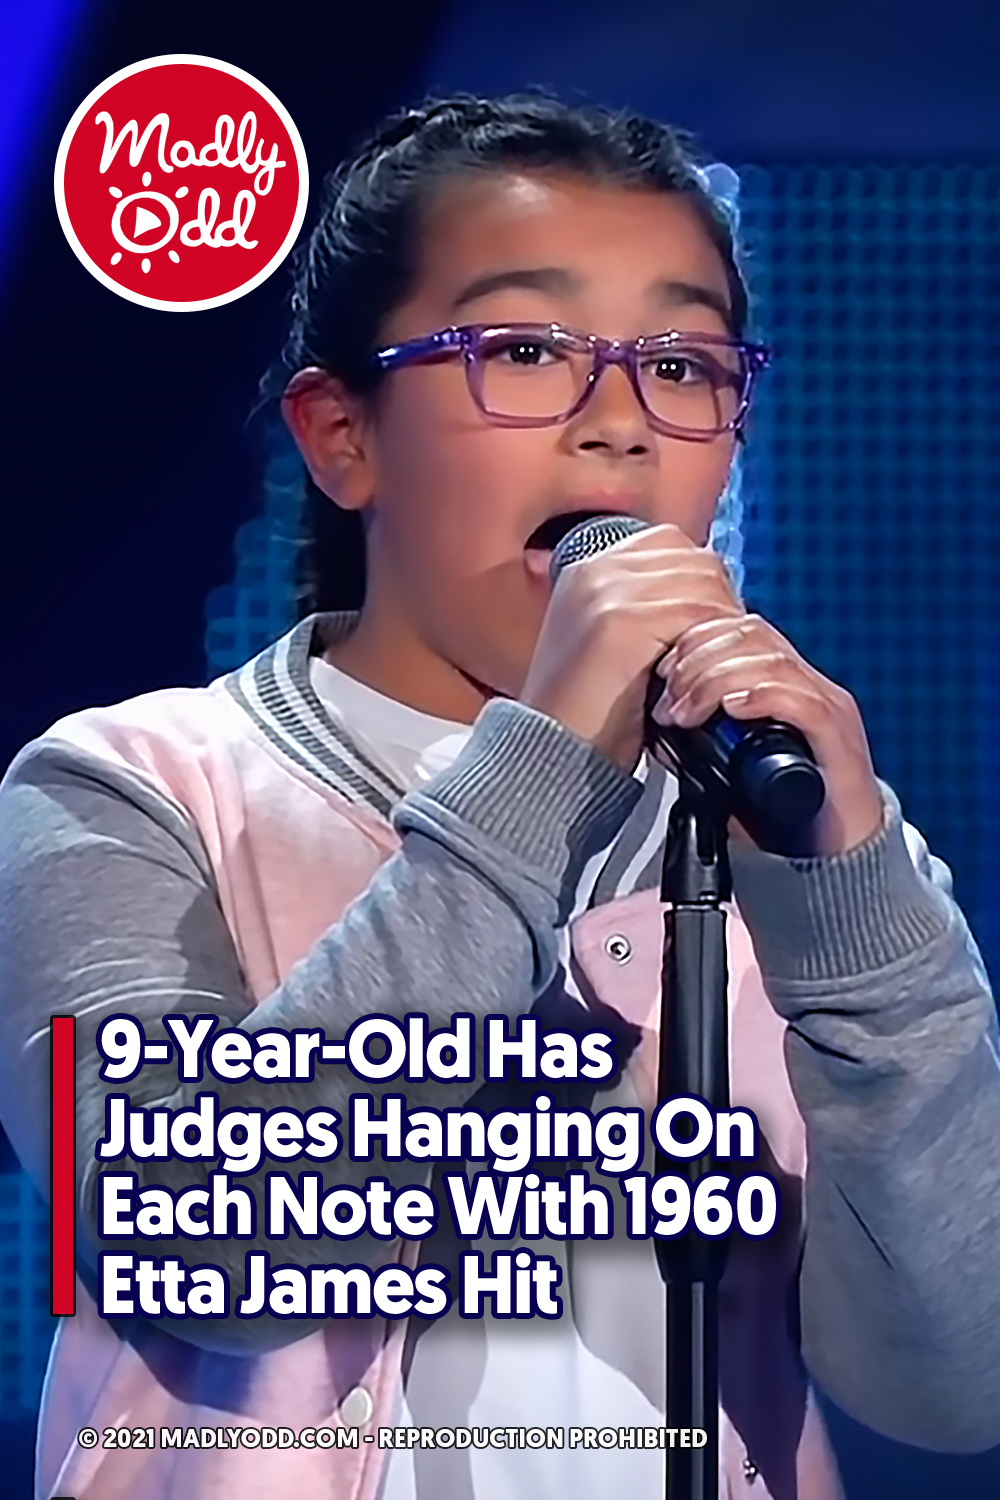 9-Year-Old Has Judges Hanging On Each Note With 1960 Etta James Hit